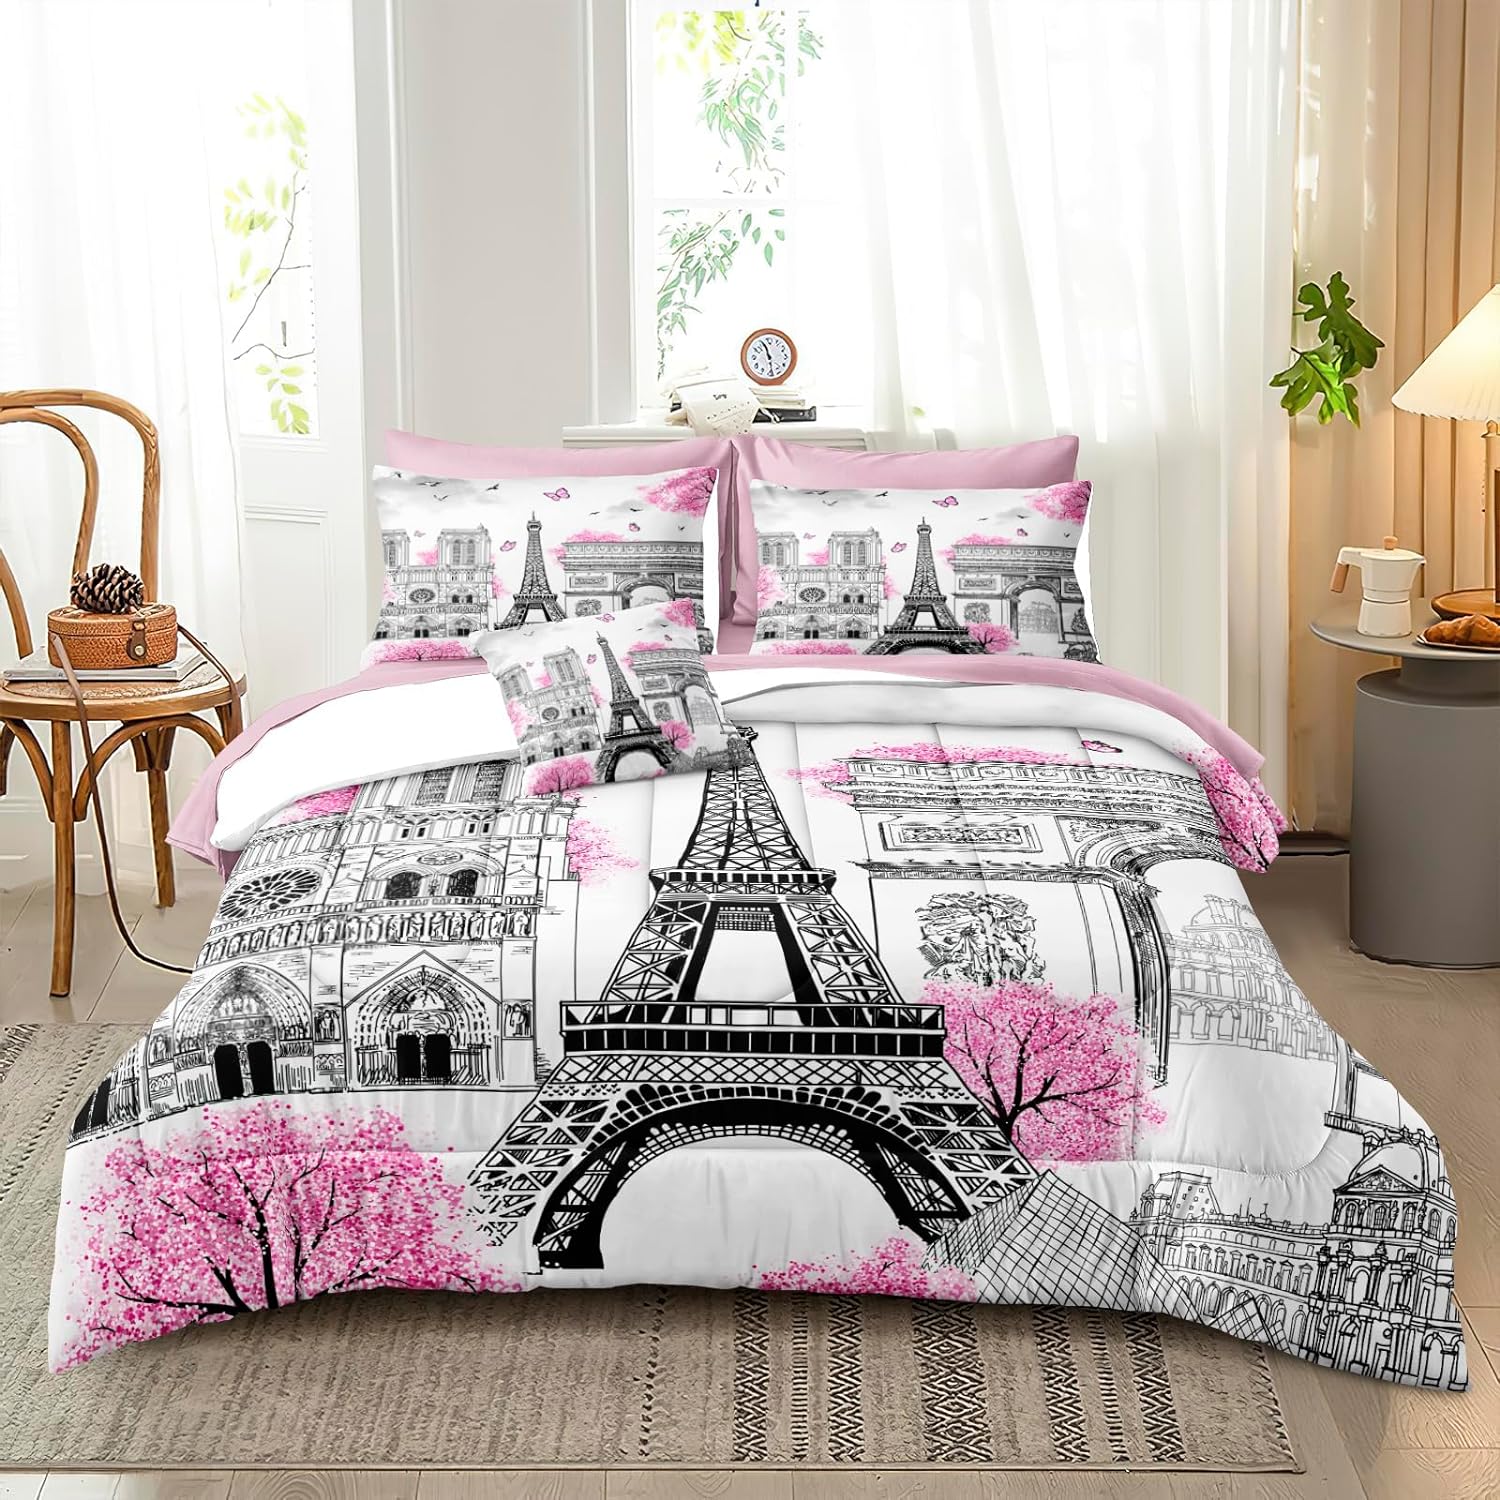 Bedbay 8 Pieces Pink and Grey Comforter Set Queen Size Paris Comforter Set Queen Pink Bedding Set Bed in a Bag Eiffel Tower Beautiful Blossom Floral Paris Themed Bedroom Decor(Pink,Queen)